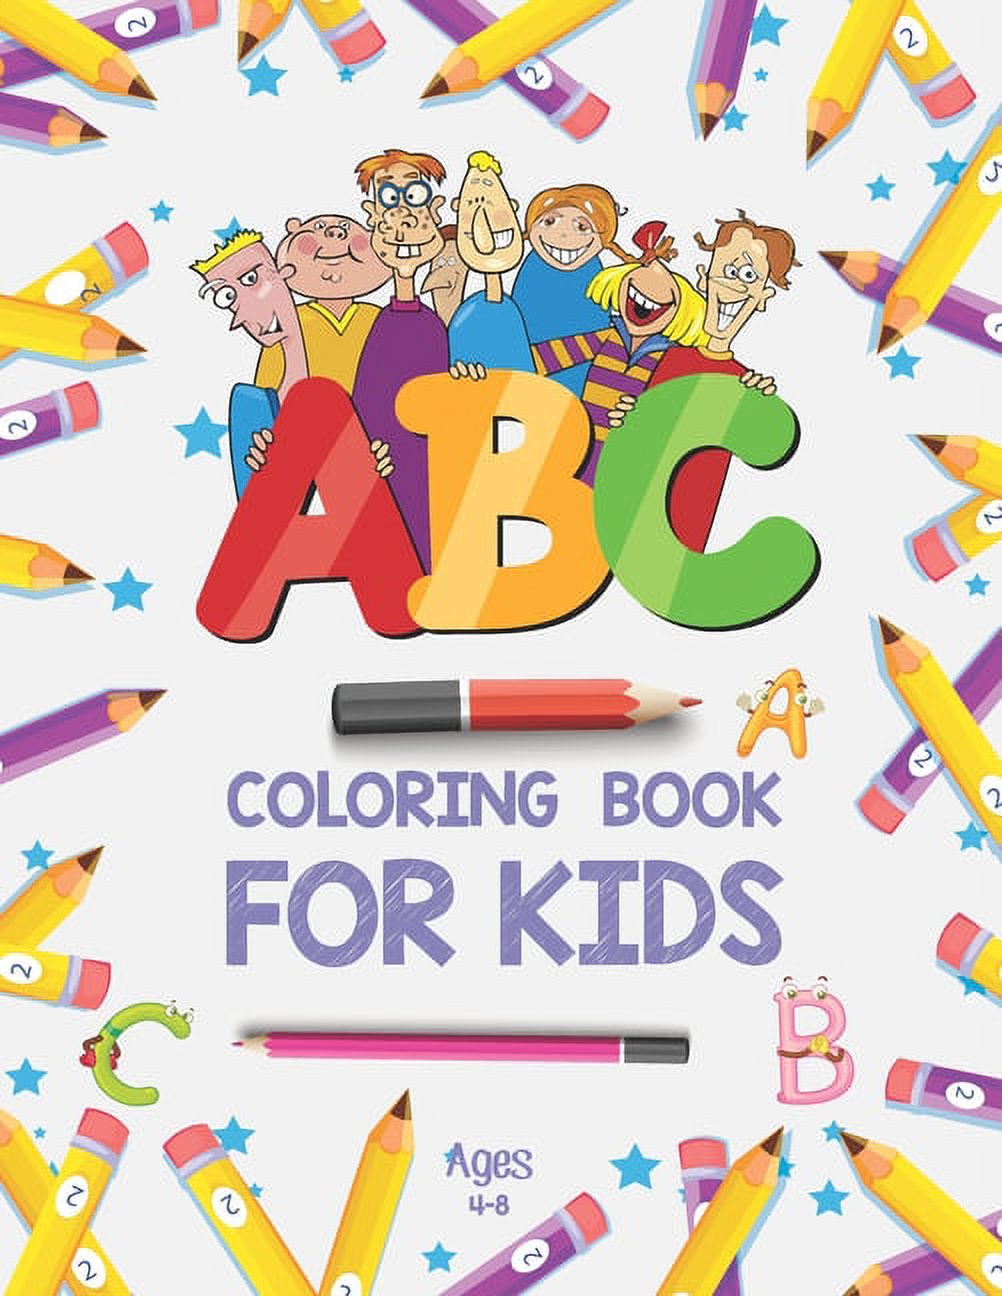 ABC Coloring Book for Kids Ages 4-8: Alphabet Coloring Book for Preschool - Fun Coloring Books for Toddlers & Kids Ages 2-4 - ABC Coloring Pages - Kids Activity Book - ABC Color Book - Alphabet Learning Book [Book]